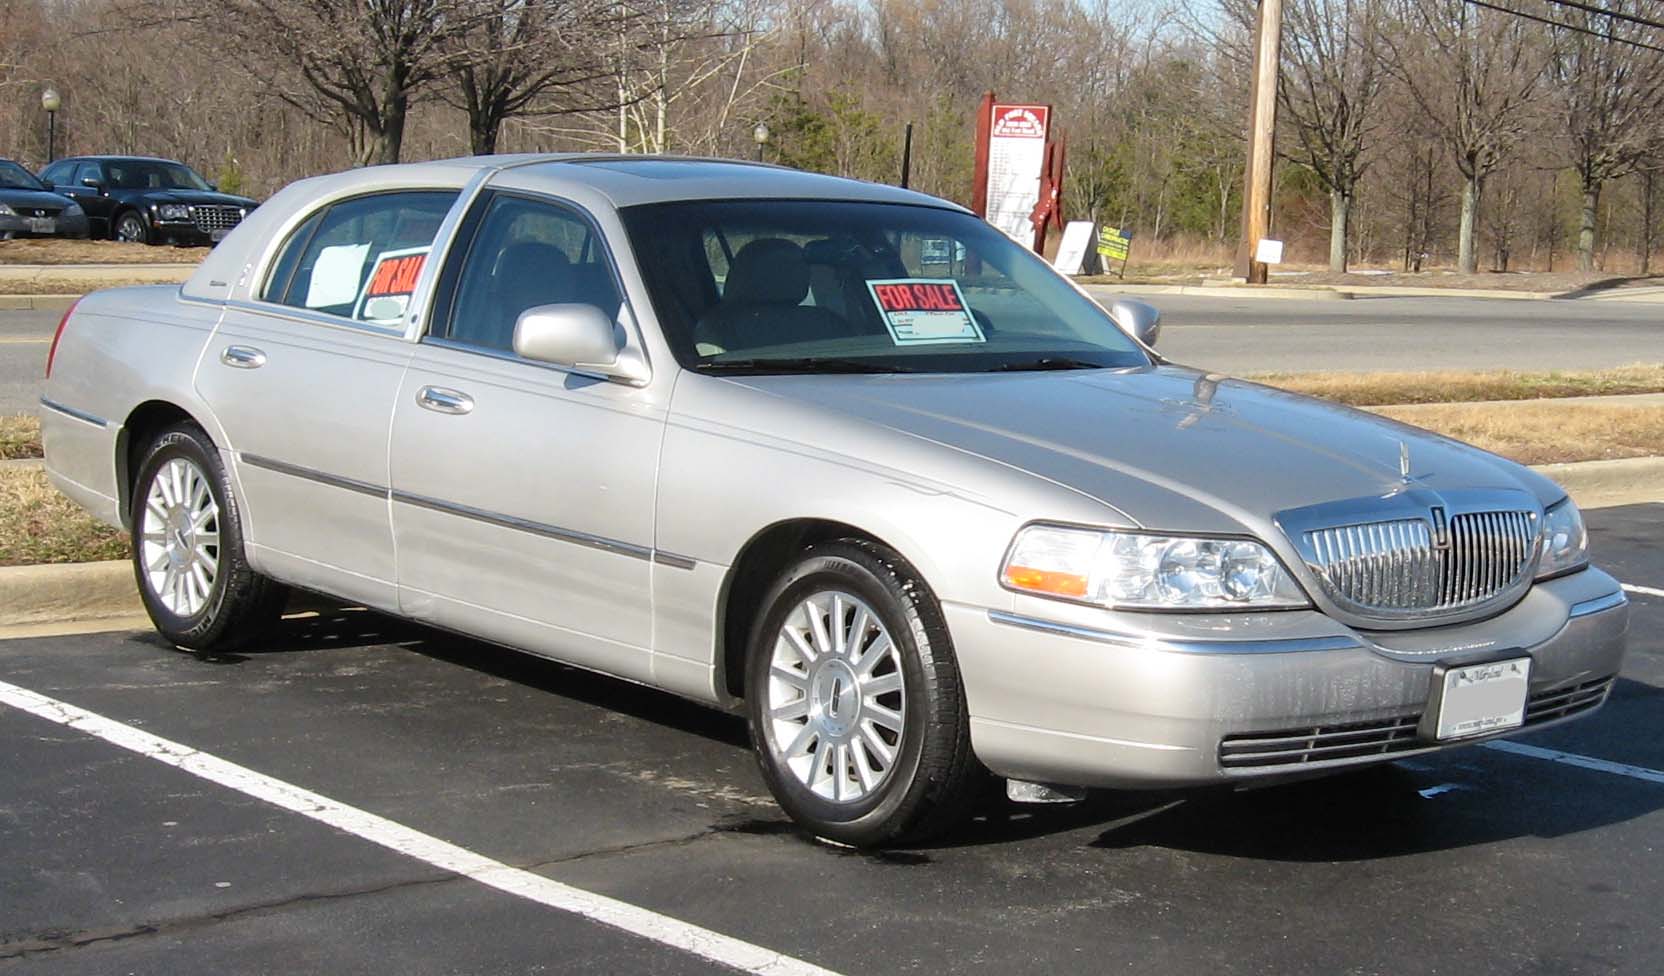 File:2003-Lincoln-Town-Car-Signature-1.jpg - Wikimedia Commons